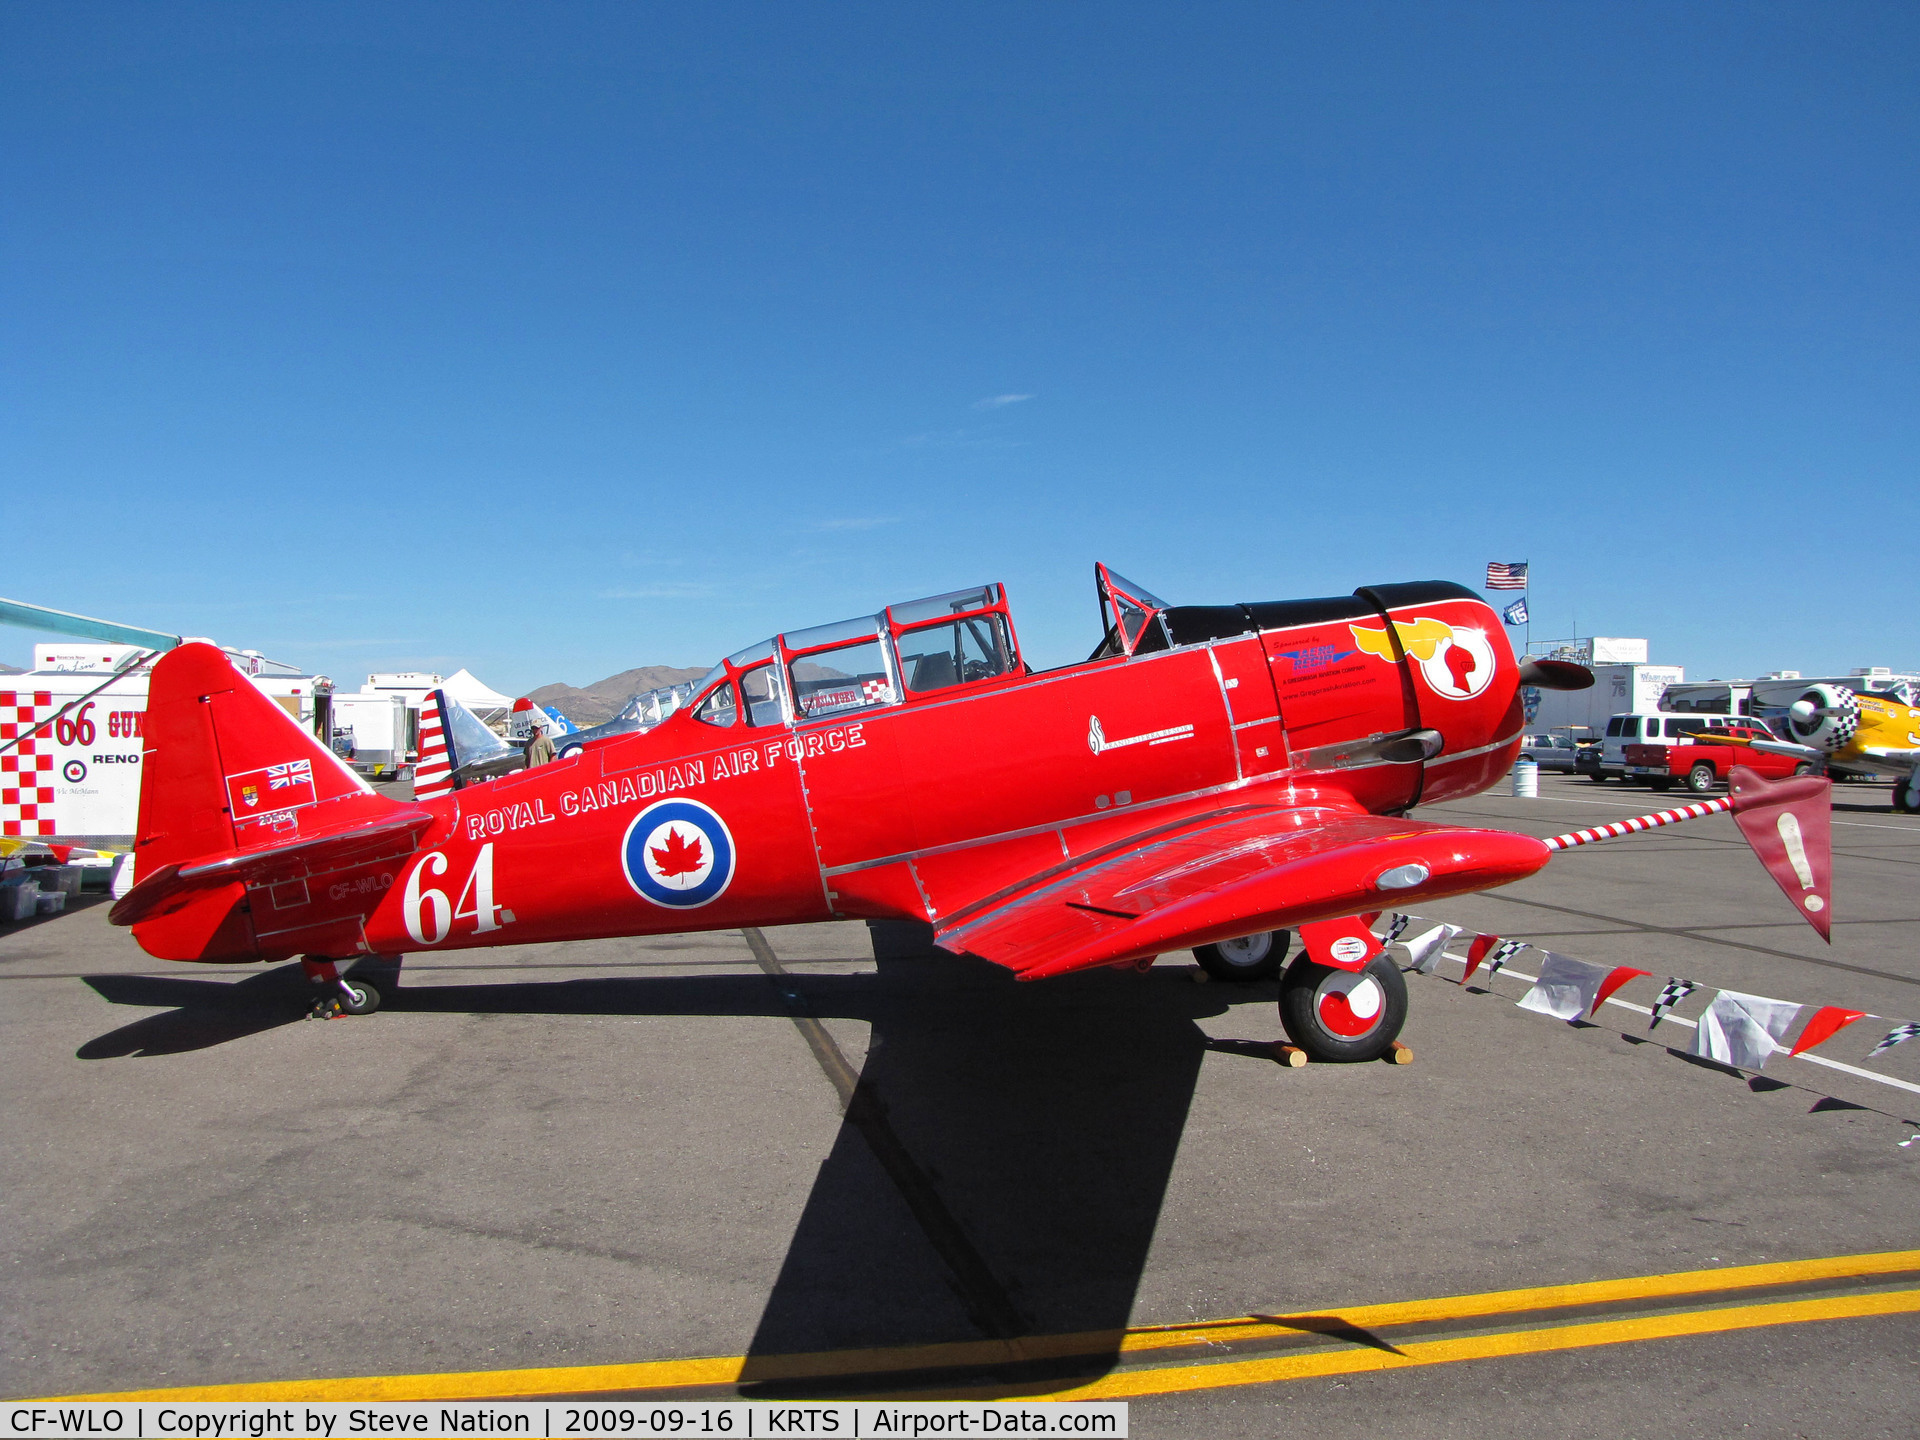 CF-WLO, 1945 Canadian Car & Foundry T-6 Harvard Mk.4 C/N CCF4-55, Race #64 is a CCF Harvard Mk. IV in Royal Canadian Air Force Red Knights colors being readied for T-6 Class racing @ 2009 Reno Air Races